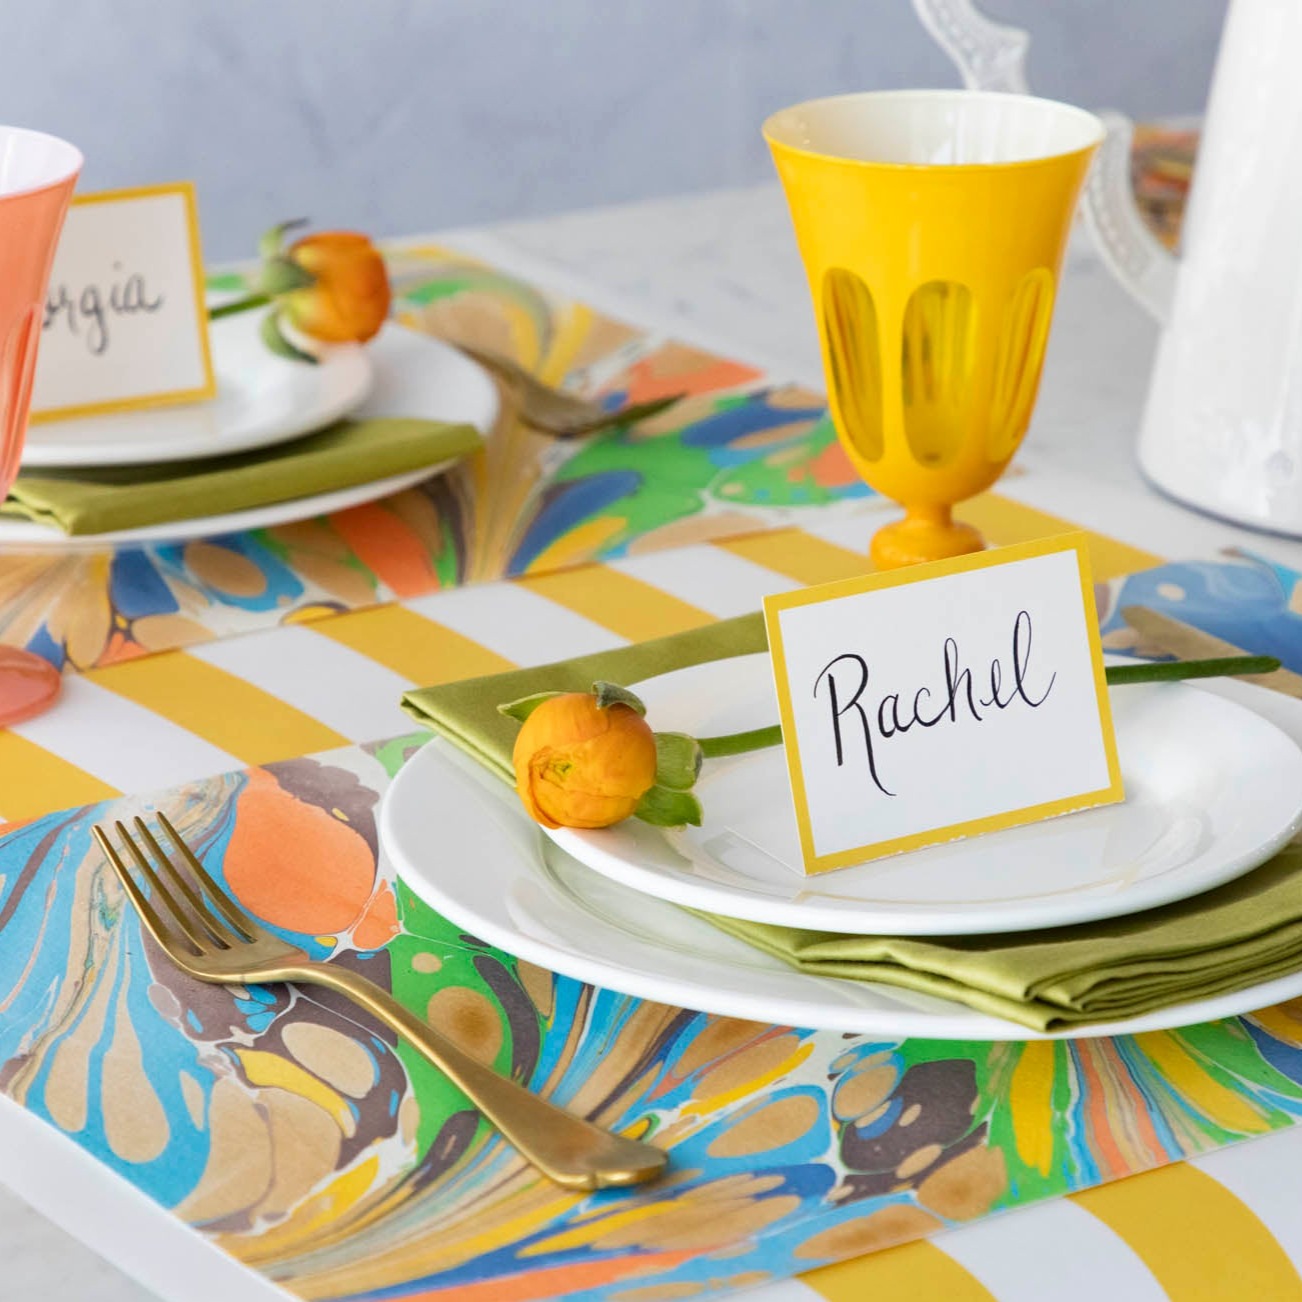 The Multi Color Fantasy Marbled Placemat under a vibrant table setting.